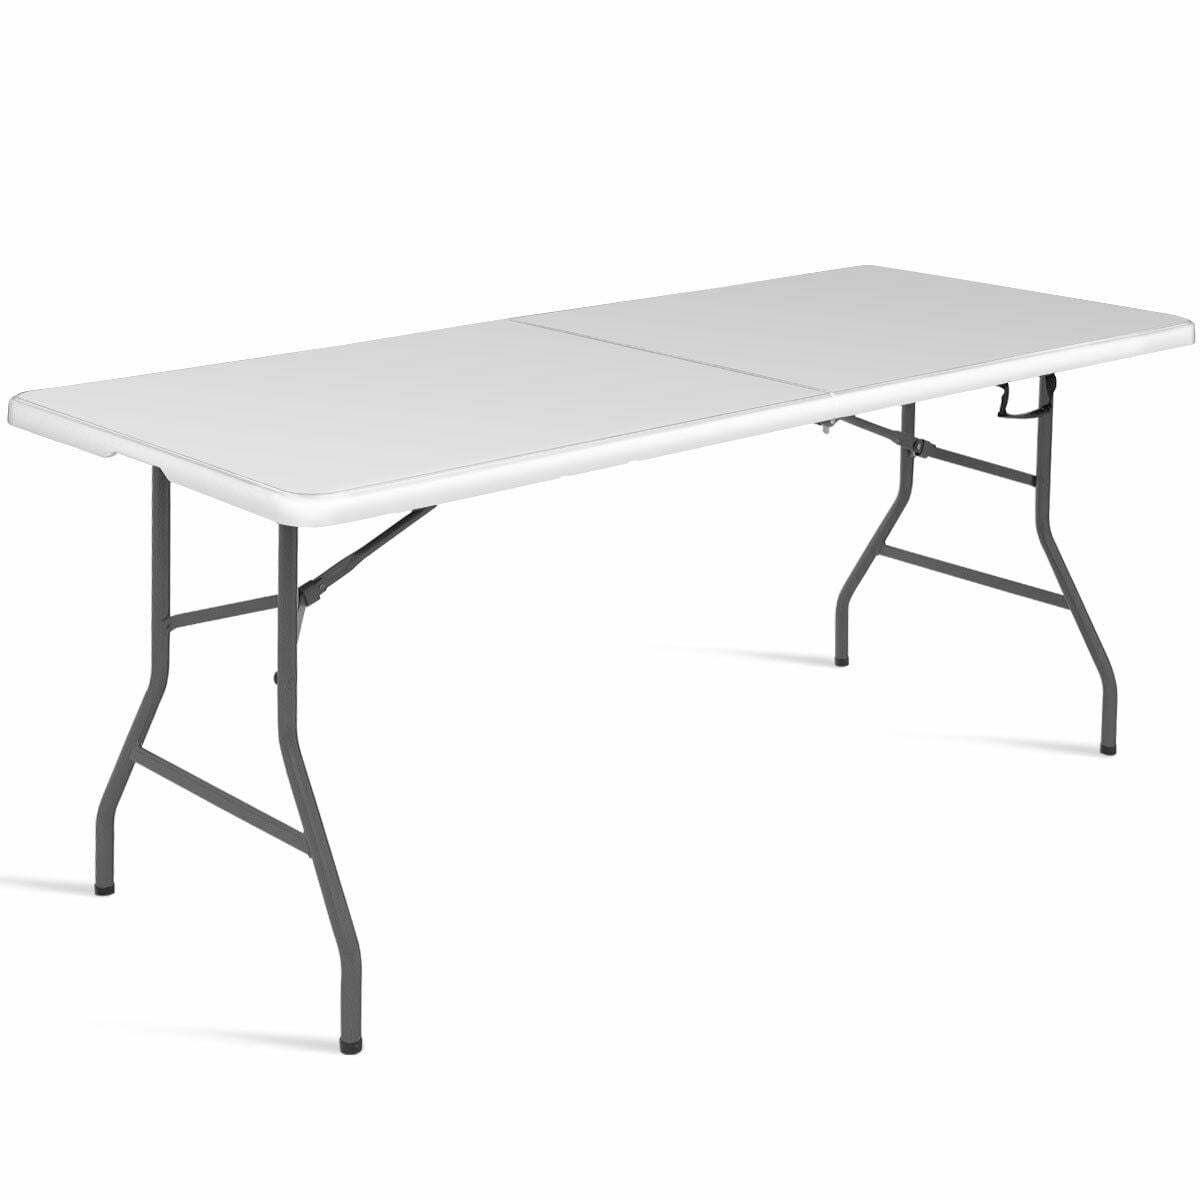 new heavy duty folding table 6 ft camping picnic banquet party garden tables 